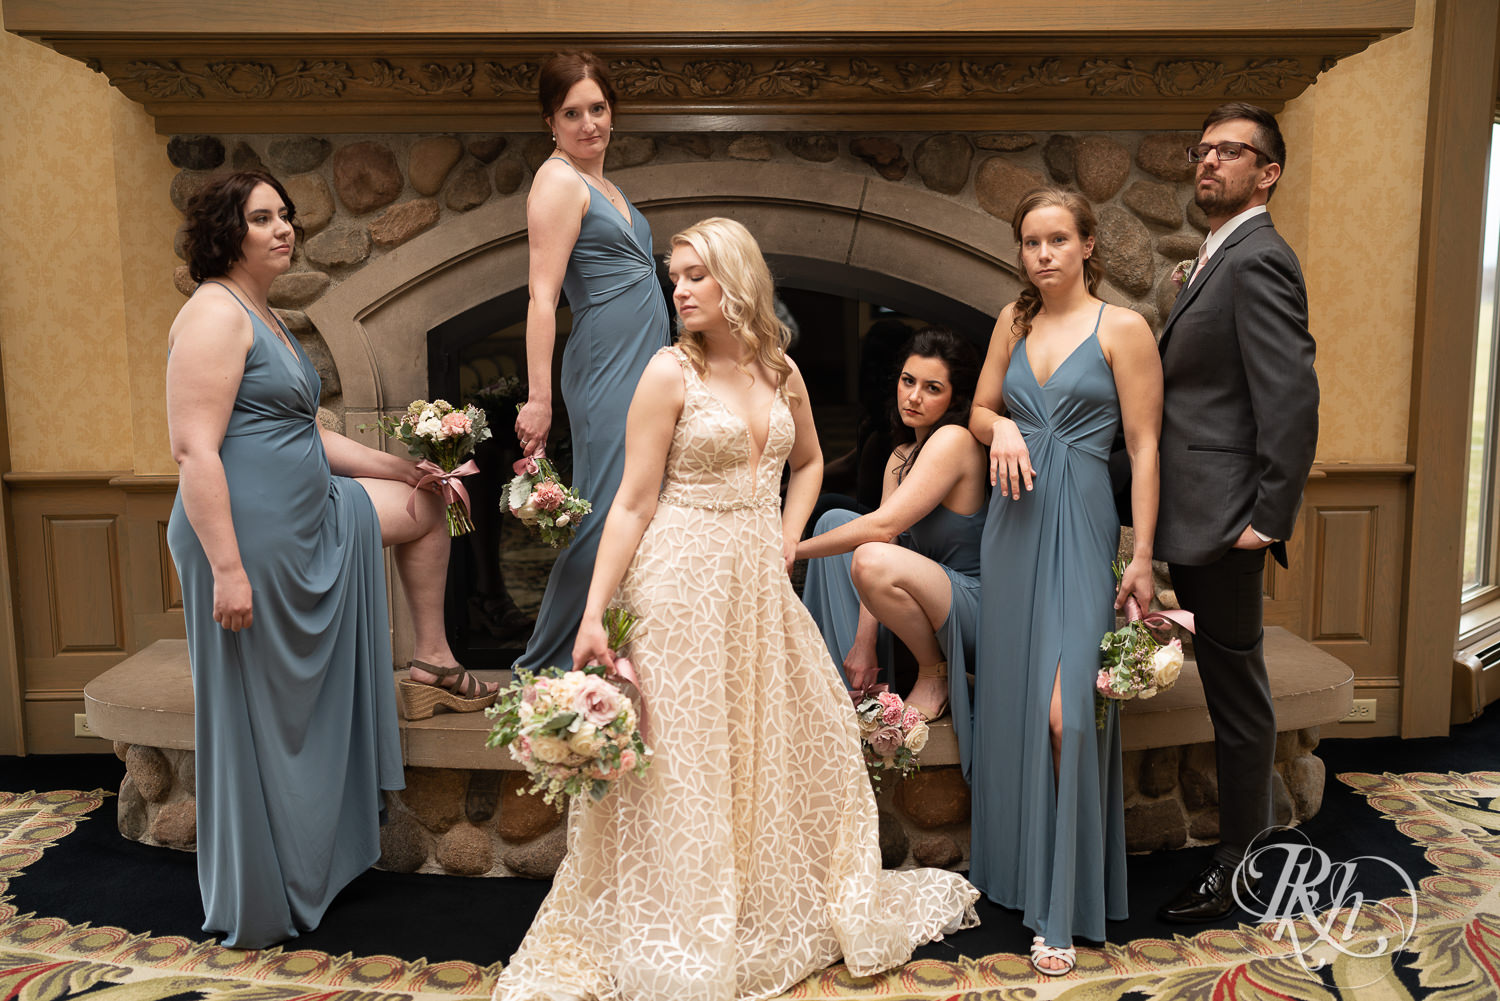 Indoor wedding party poses in front of fireplace at Rush Creek Golf Club in Maple Grove, Minnesota.